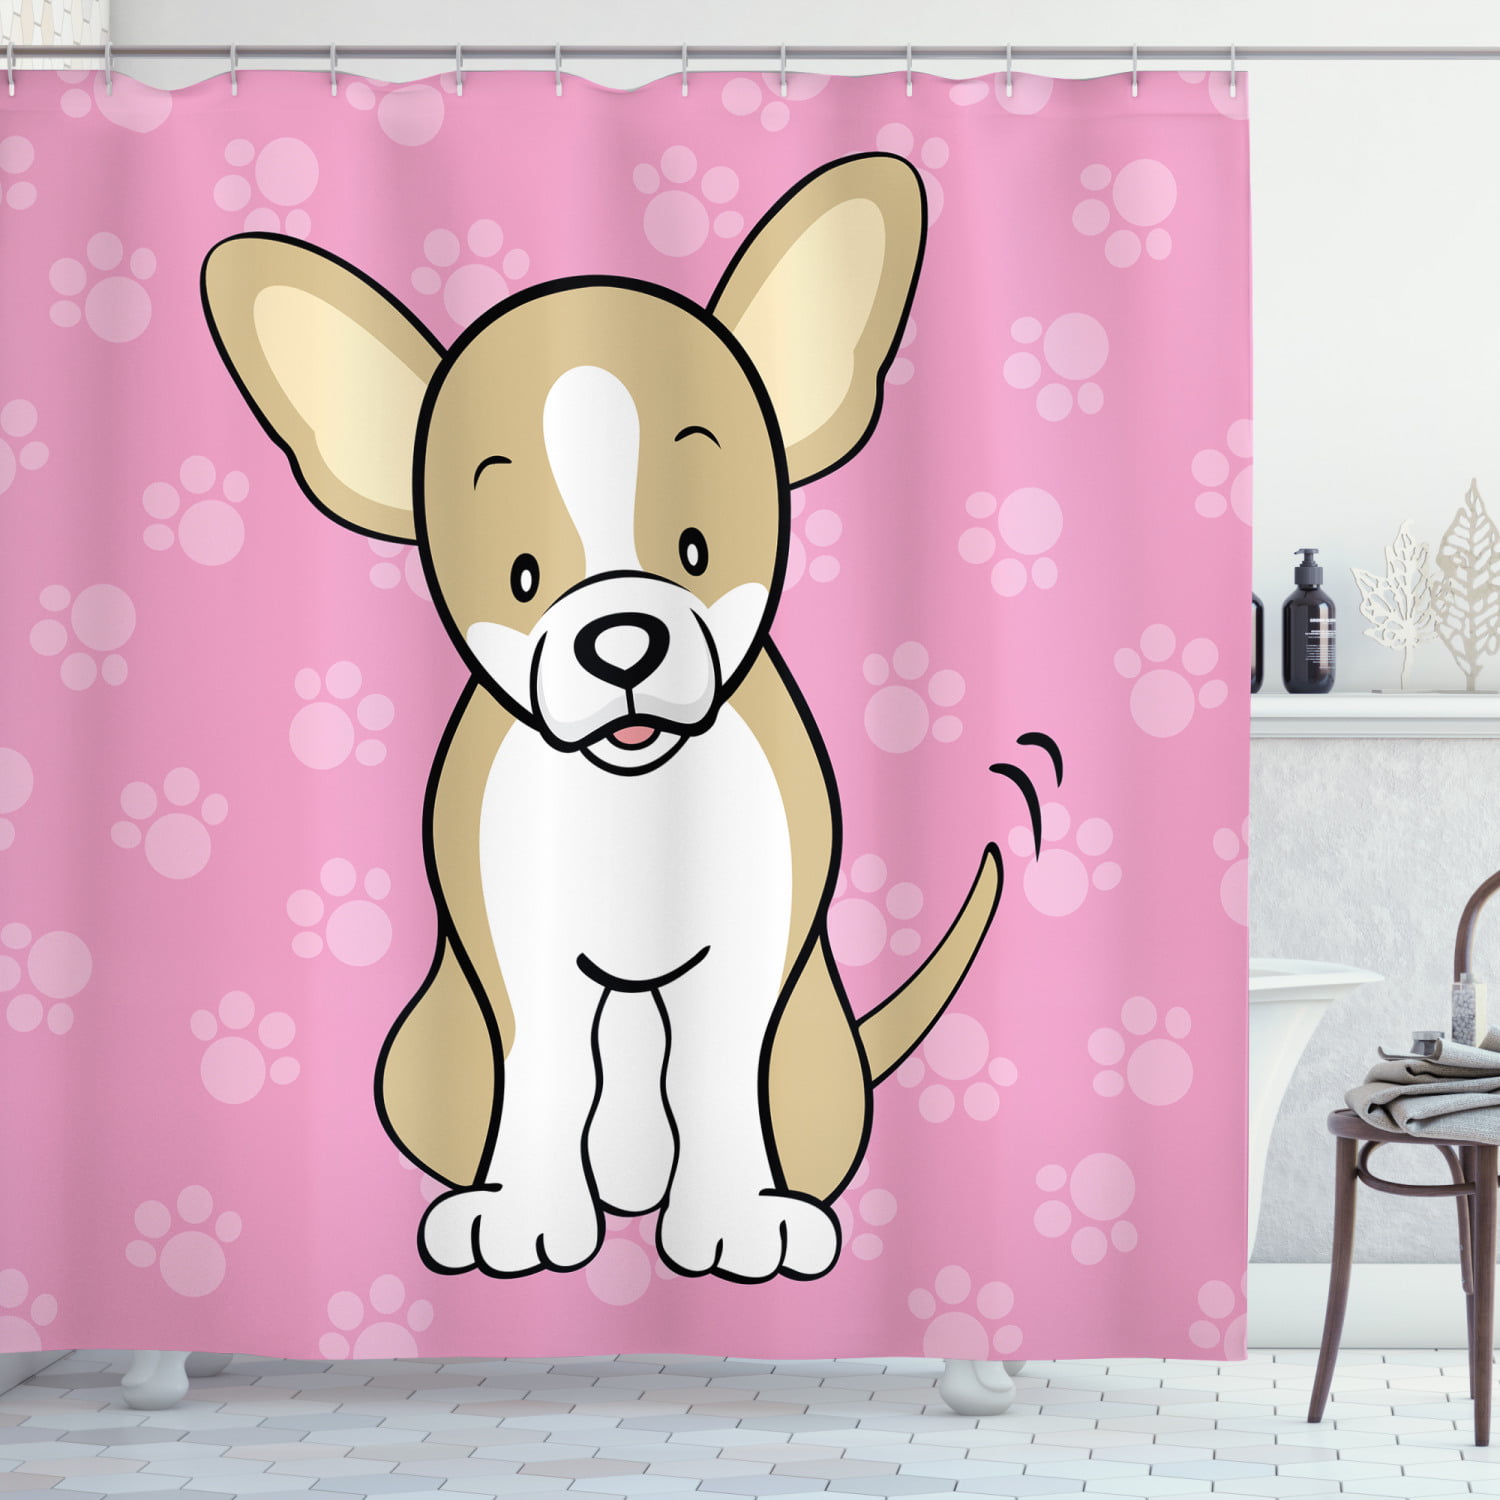 Chihuahua dog and grey cat 71 Inch Waterproof Fabric Shower Curtain Bedroom Mat 